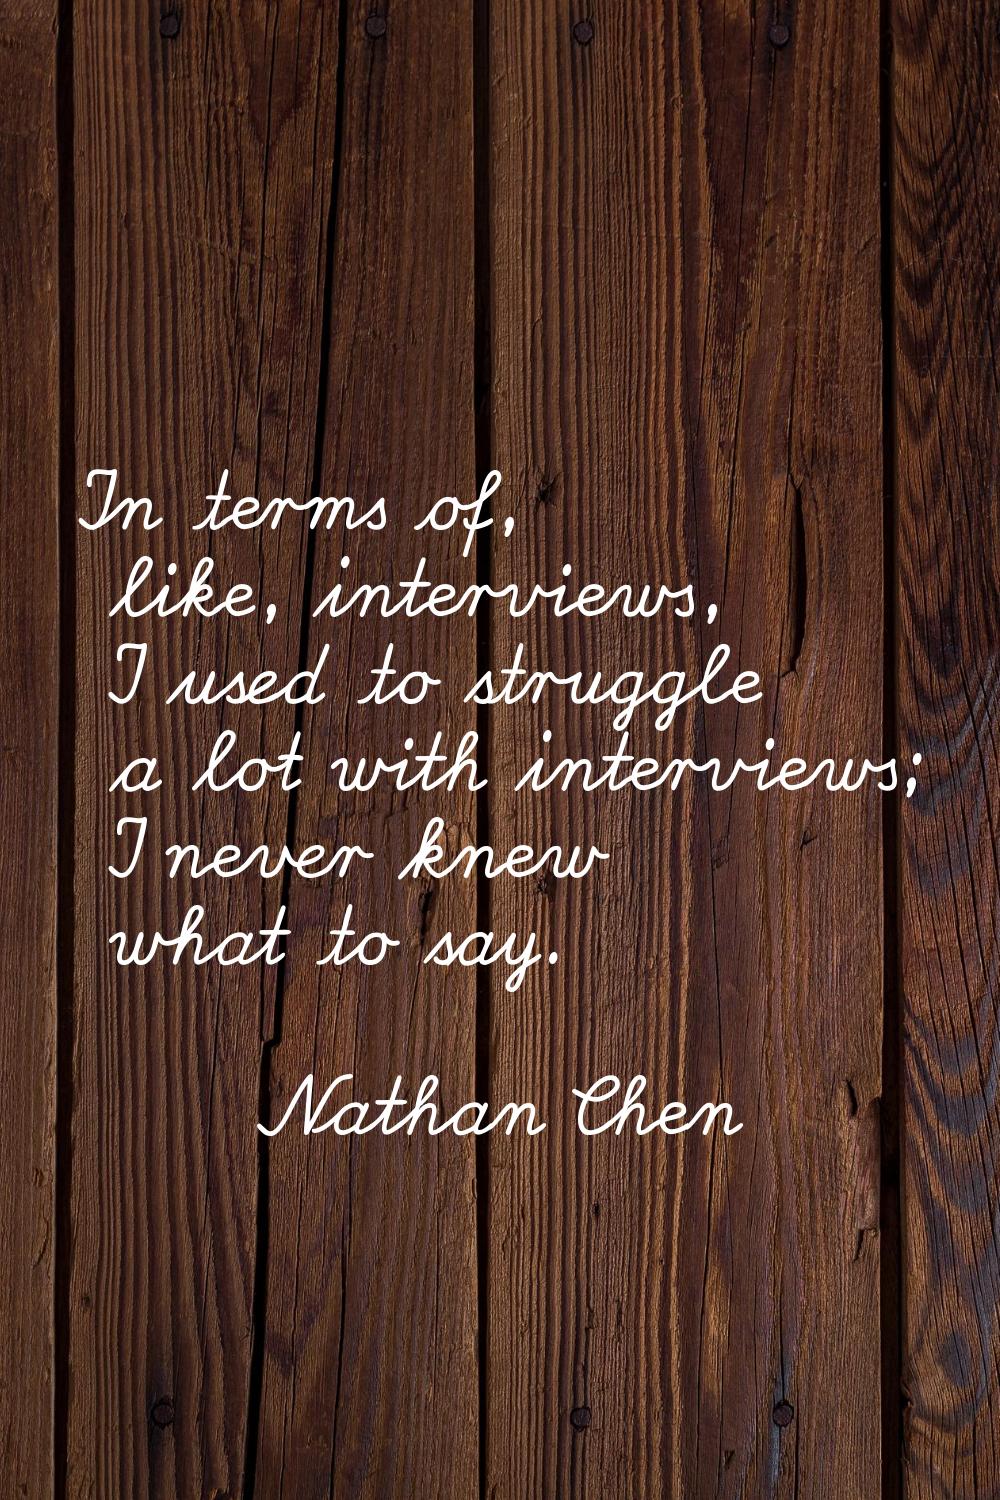 In terms of, like, interviews, I used to struggle a lot with interviews; I never knew what to say.